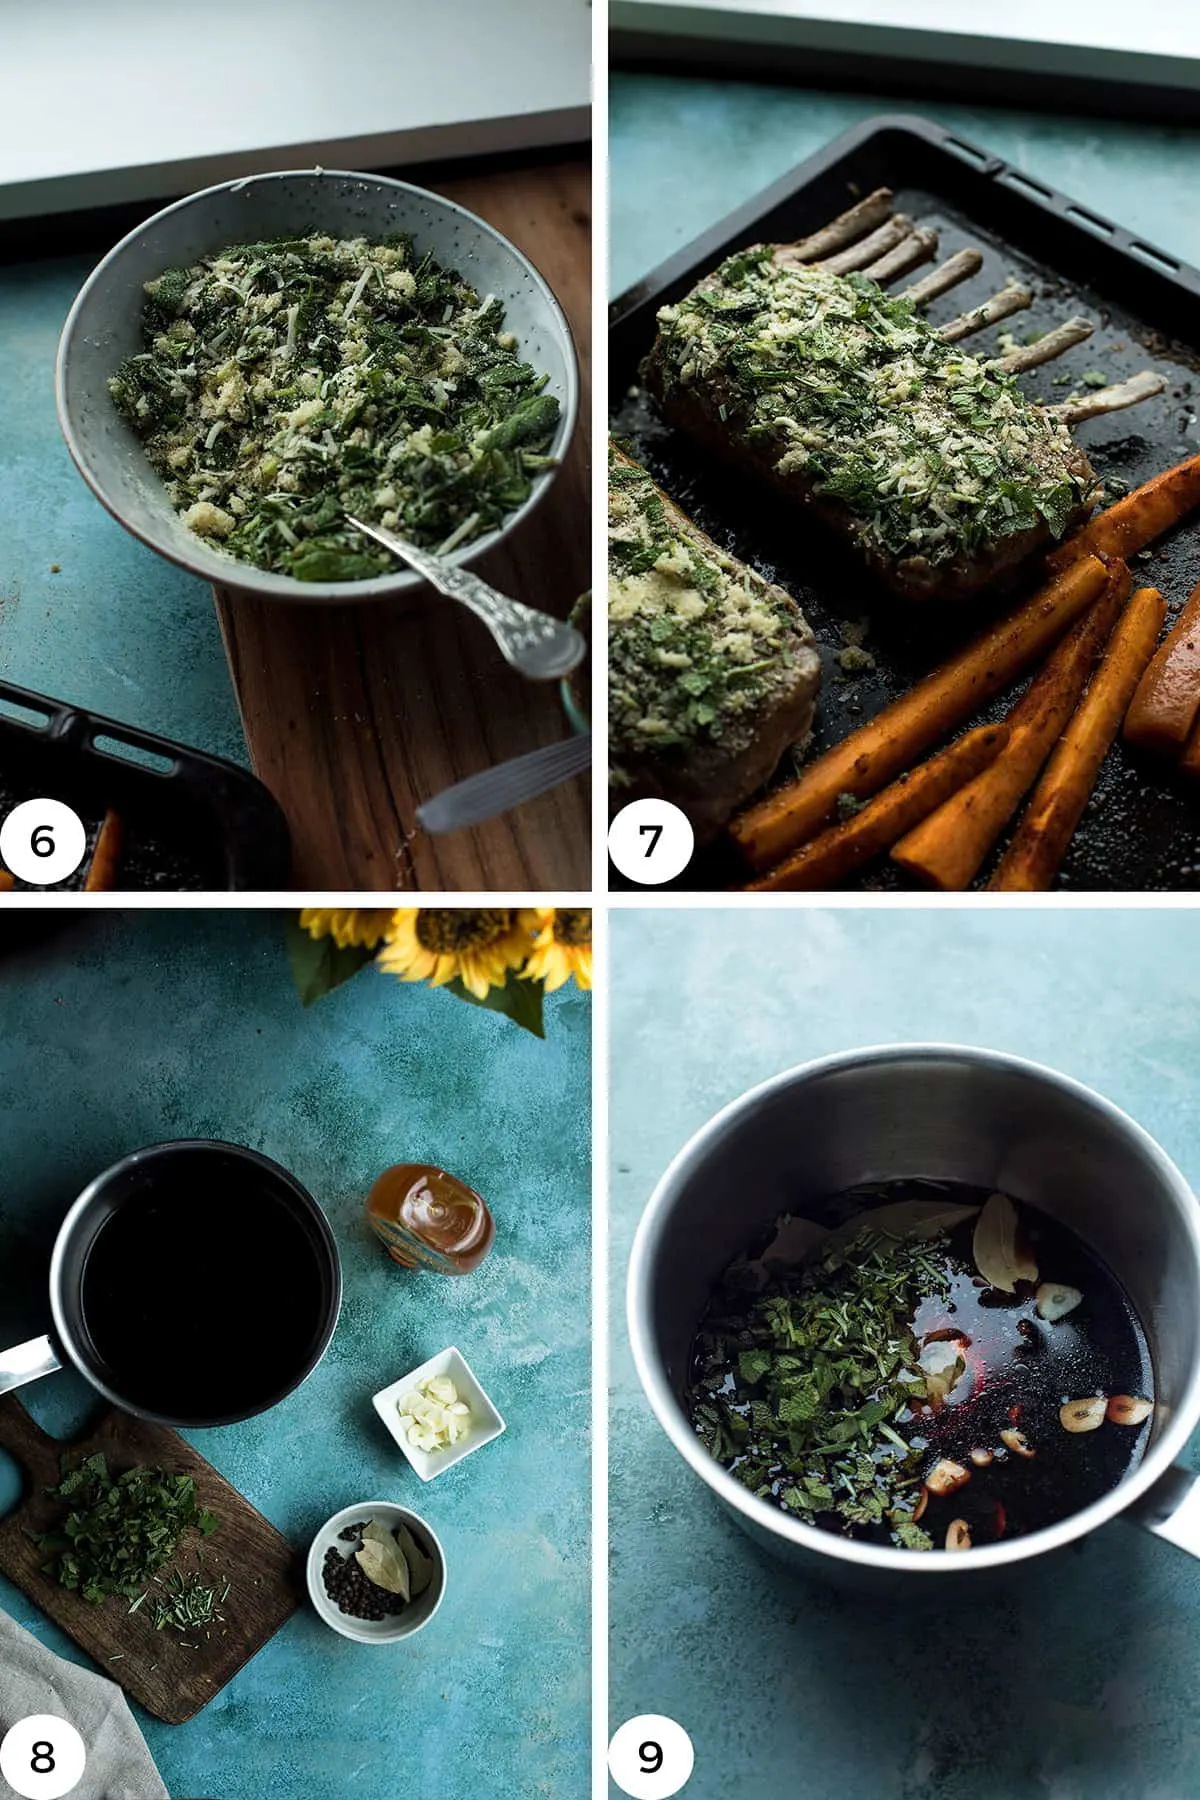 Steps to make the sauce and herb crust.